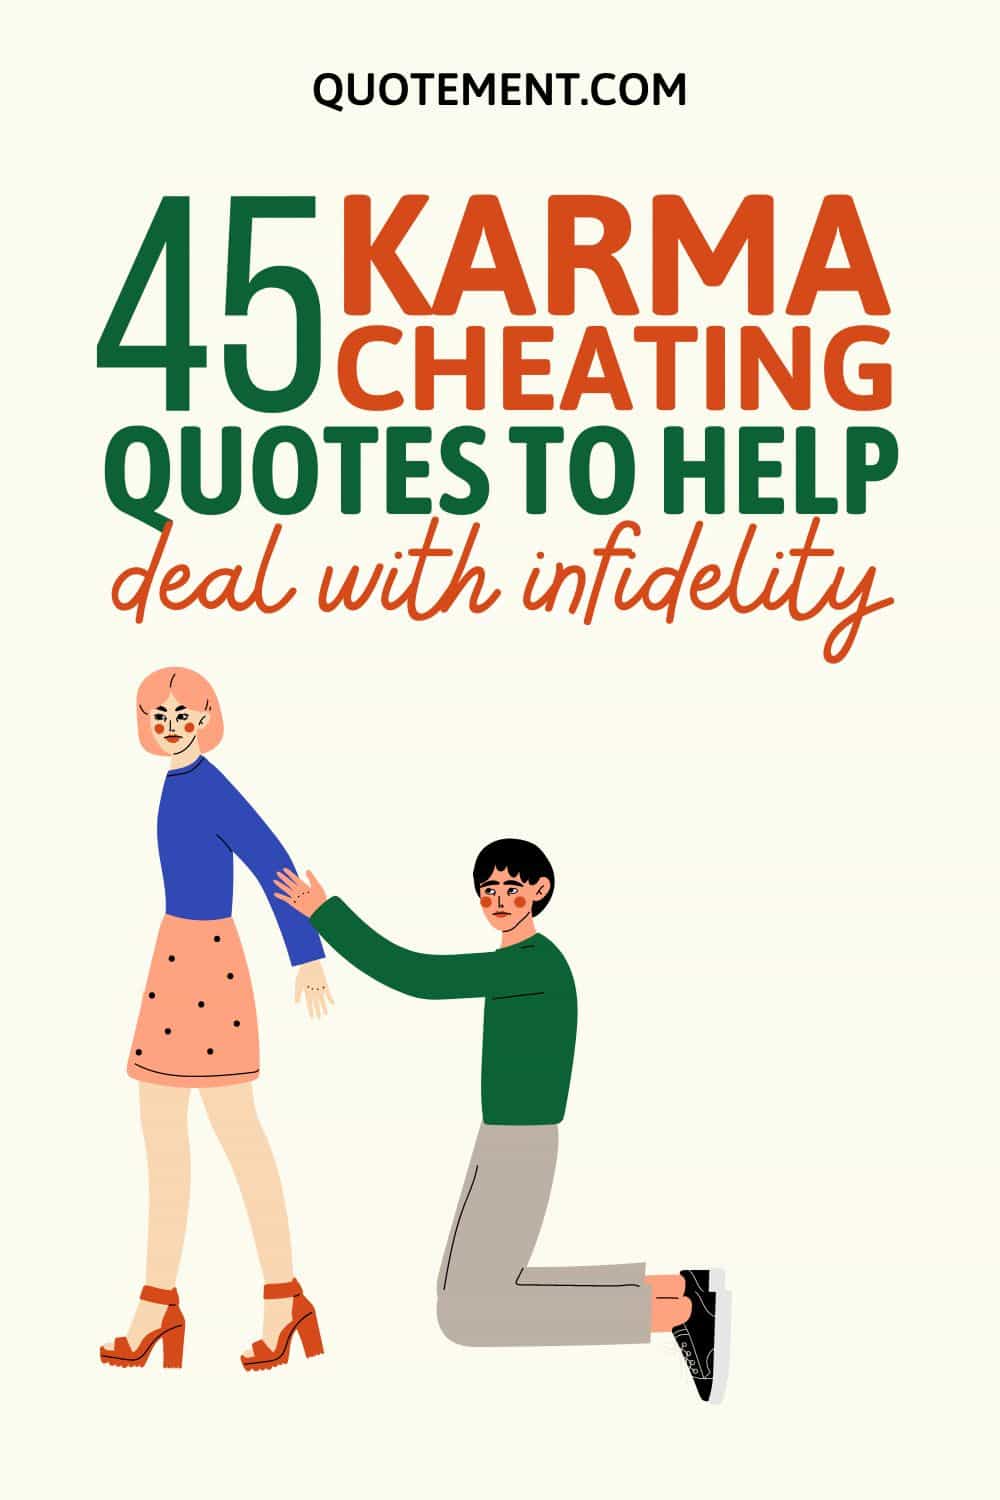 45 Best Karma Cheating Quotes To Help Deal With Infidelity
